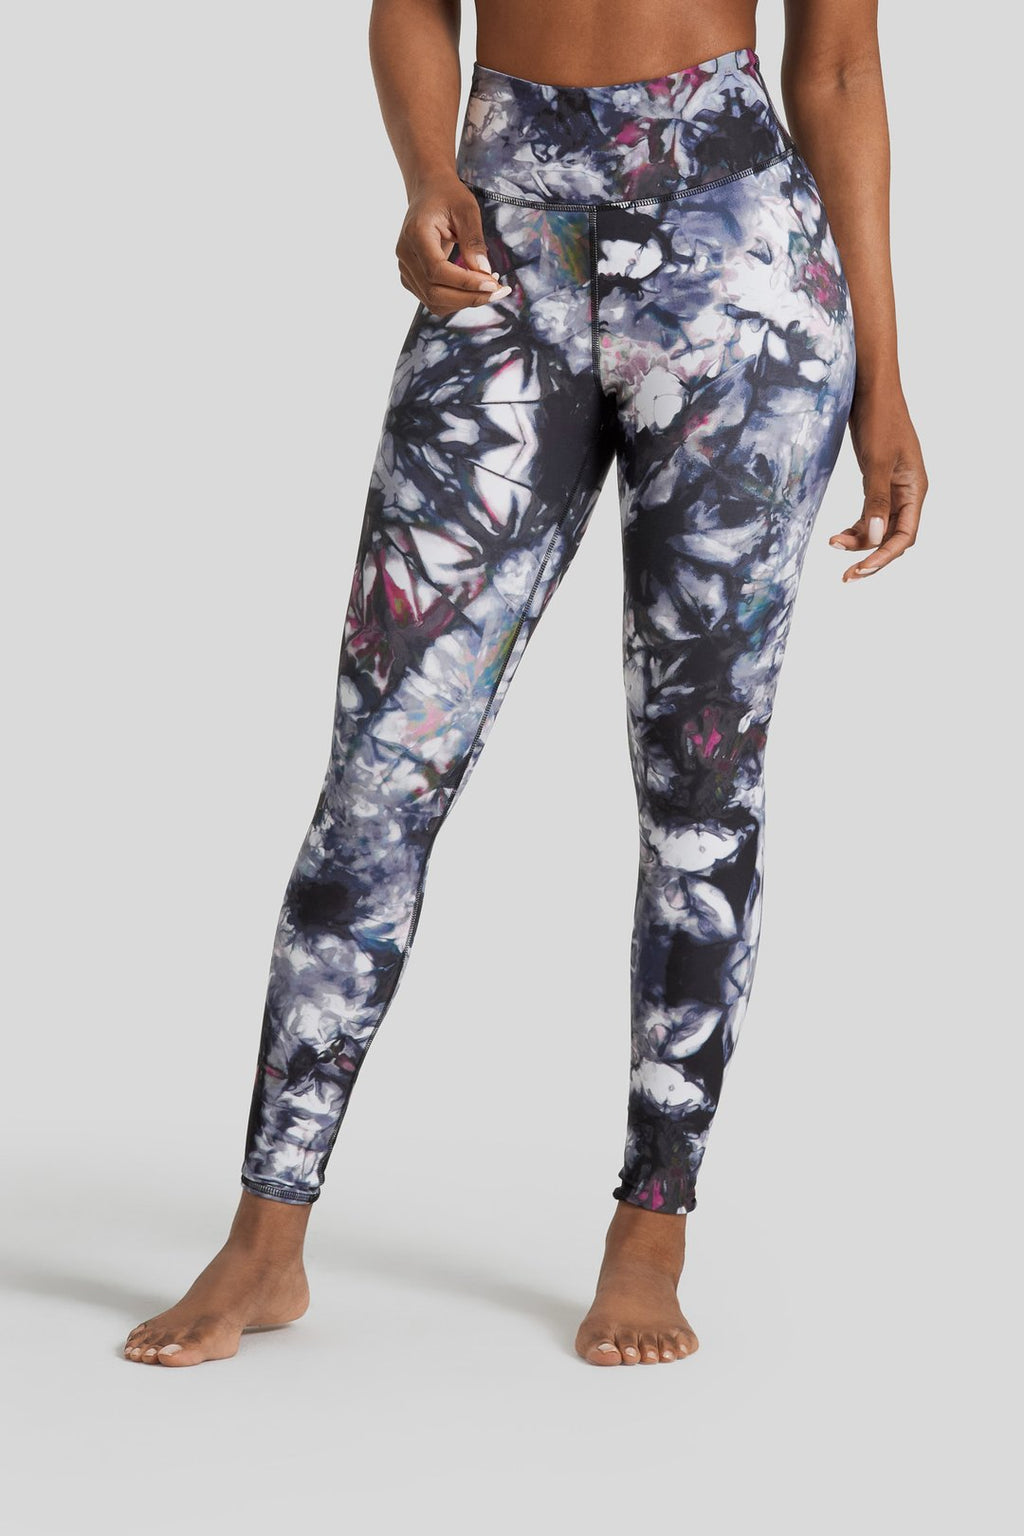 Abstract Print Women's Leggings With Pockets (Wild Green) – TWITCHY